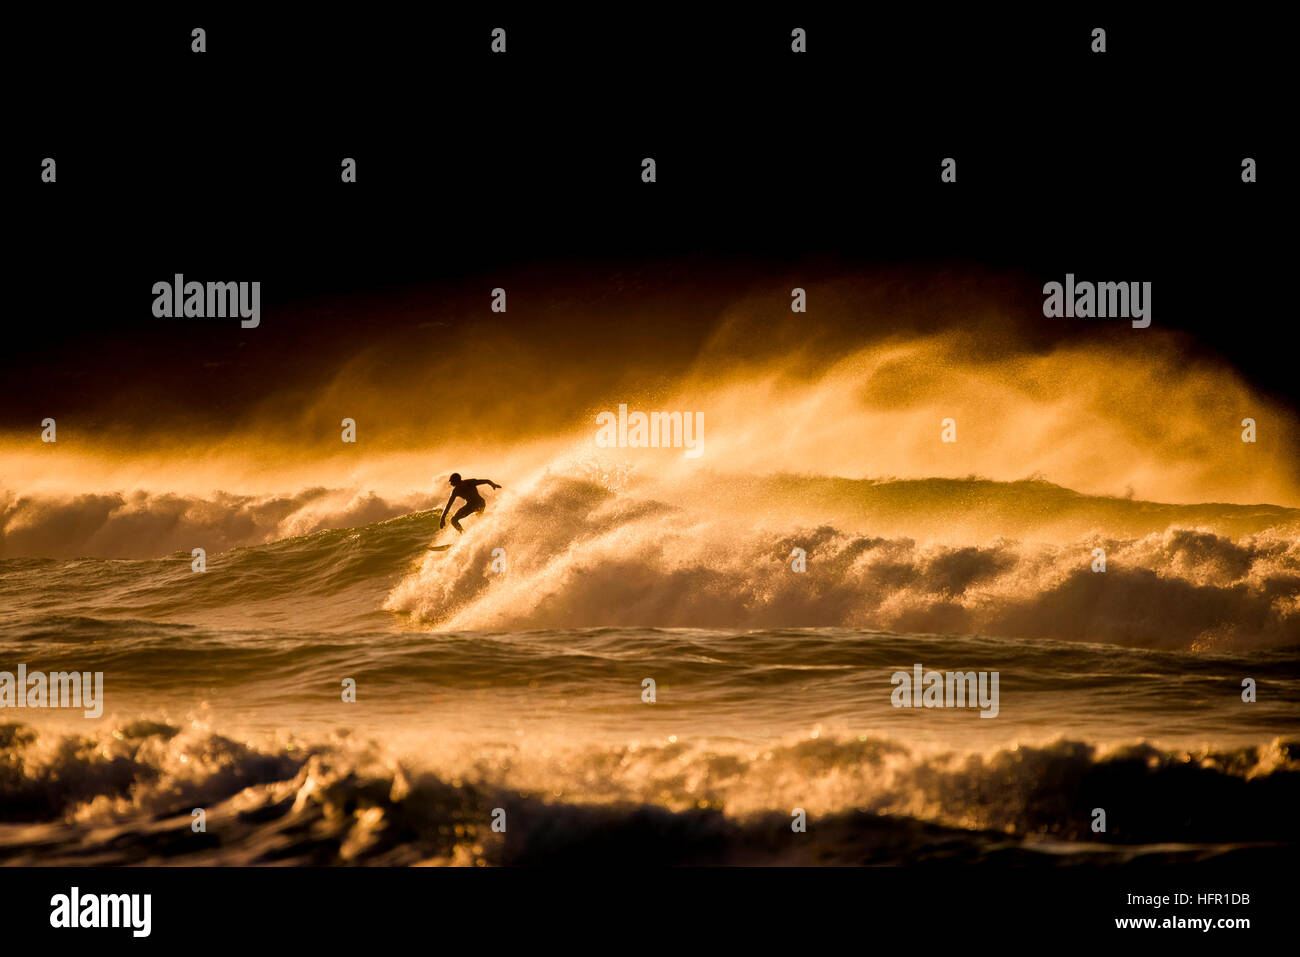 A surfer rides a wild wave during a golden sunset at Fistral Beach in Newquay, Cornwall.  Surfer in action. UK. Stock Photo